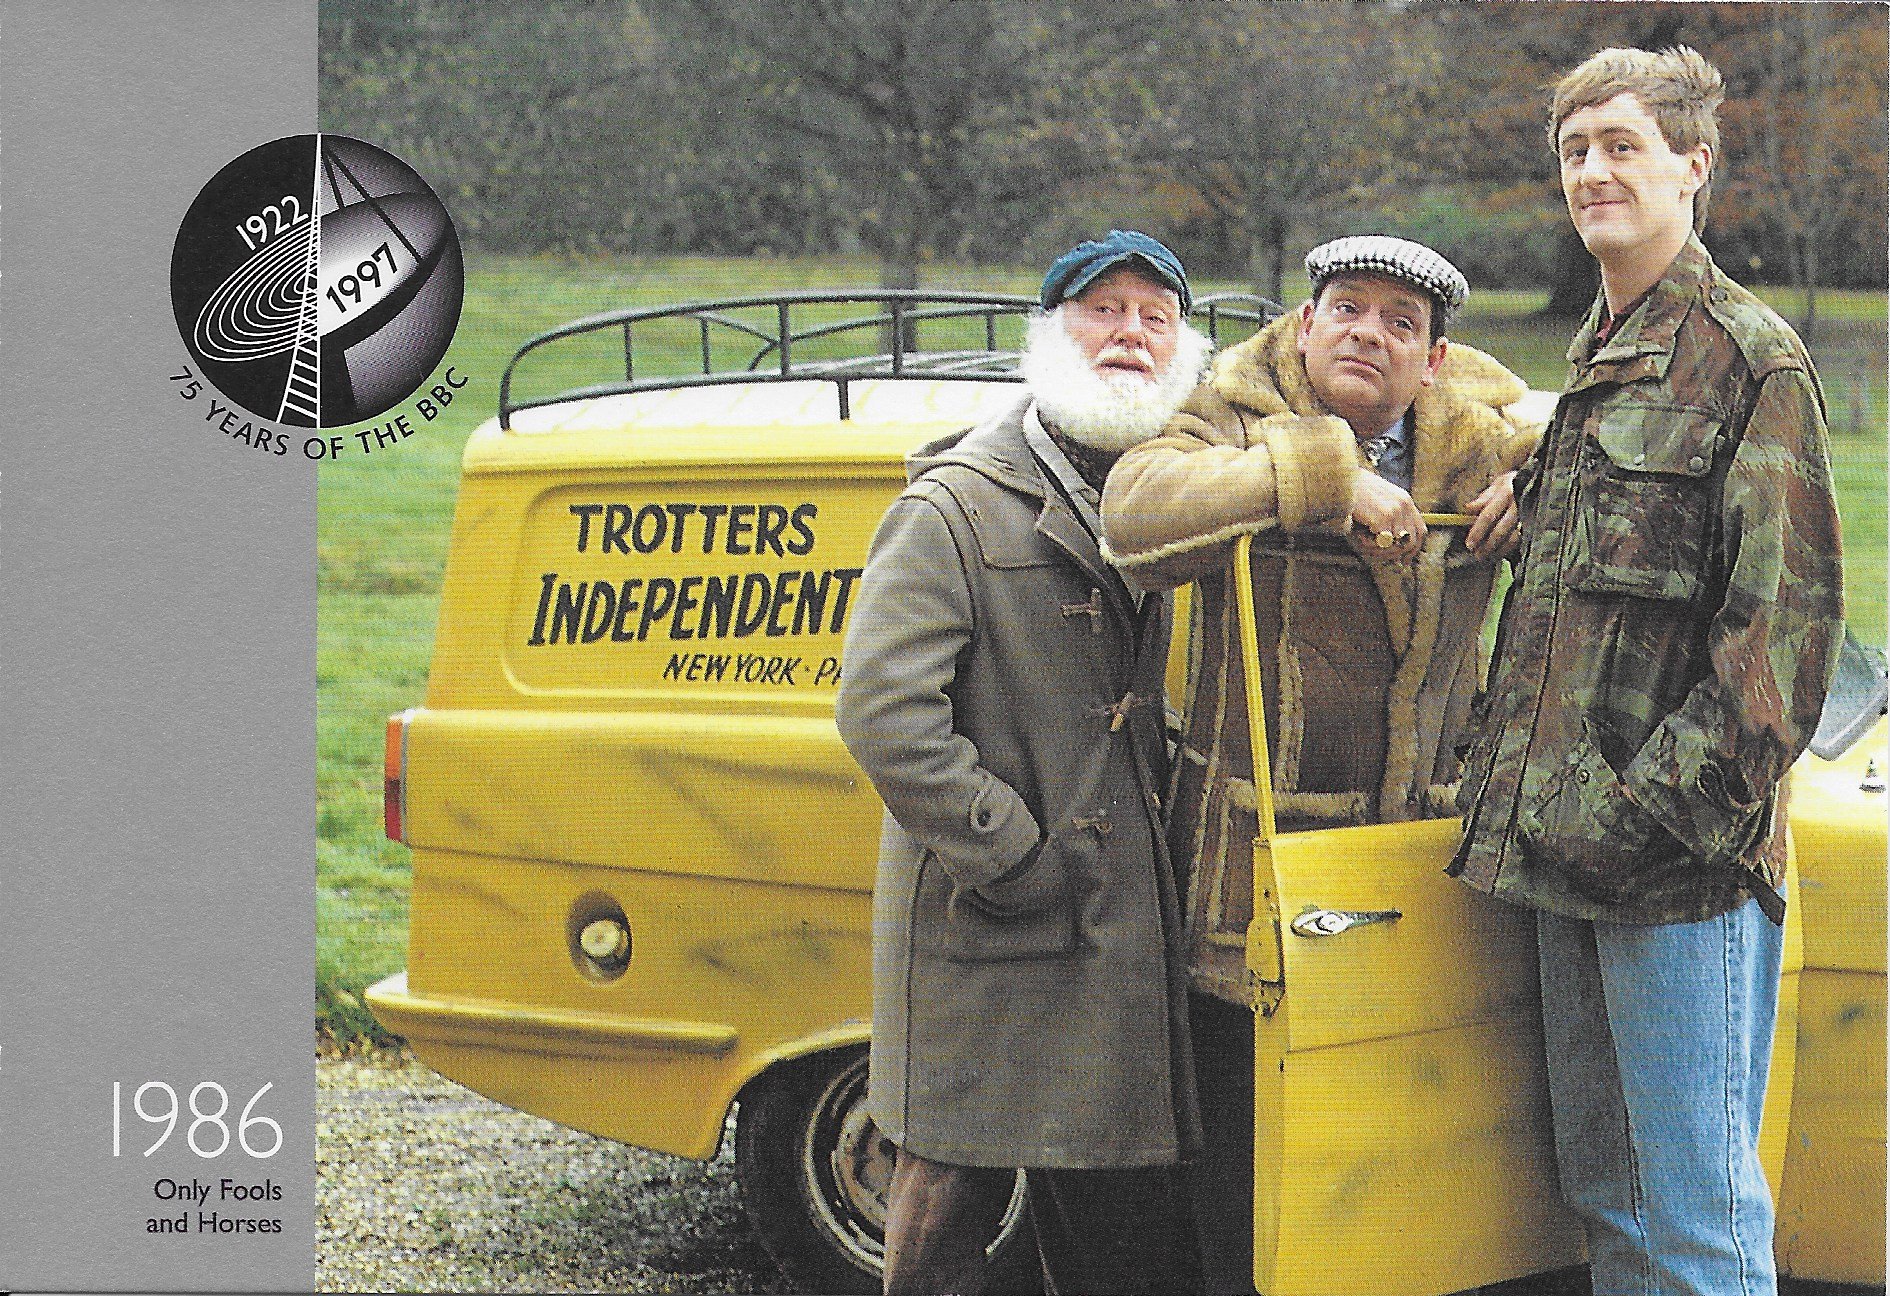 Picture of 75 years of the BBC - Only fools and horses by artist Unknown from the BBC postcards - Records and Tapes library